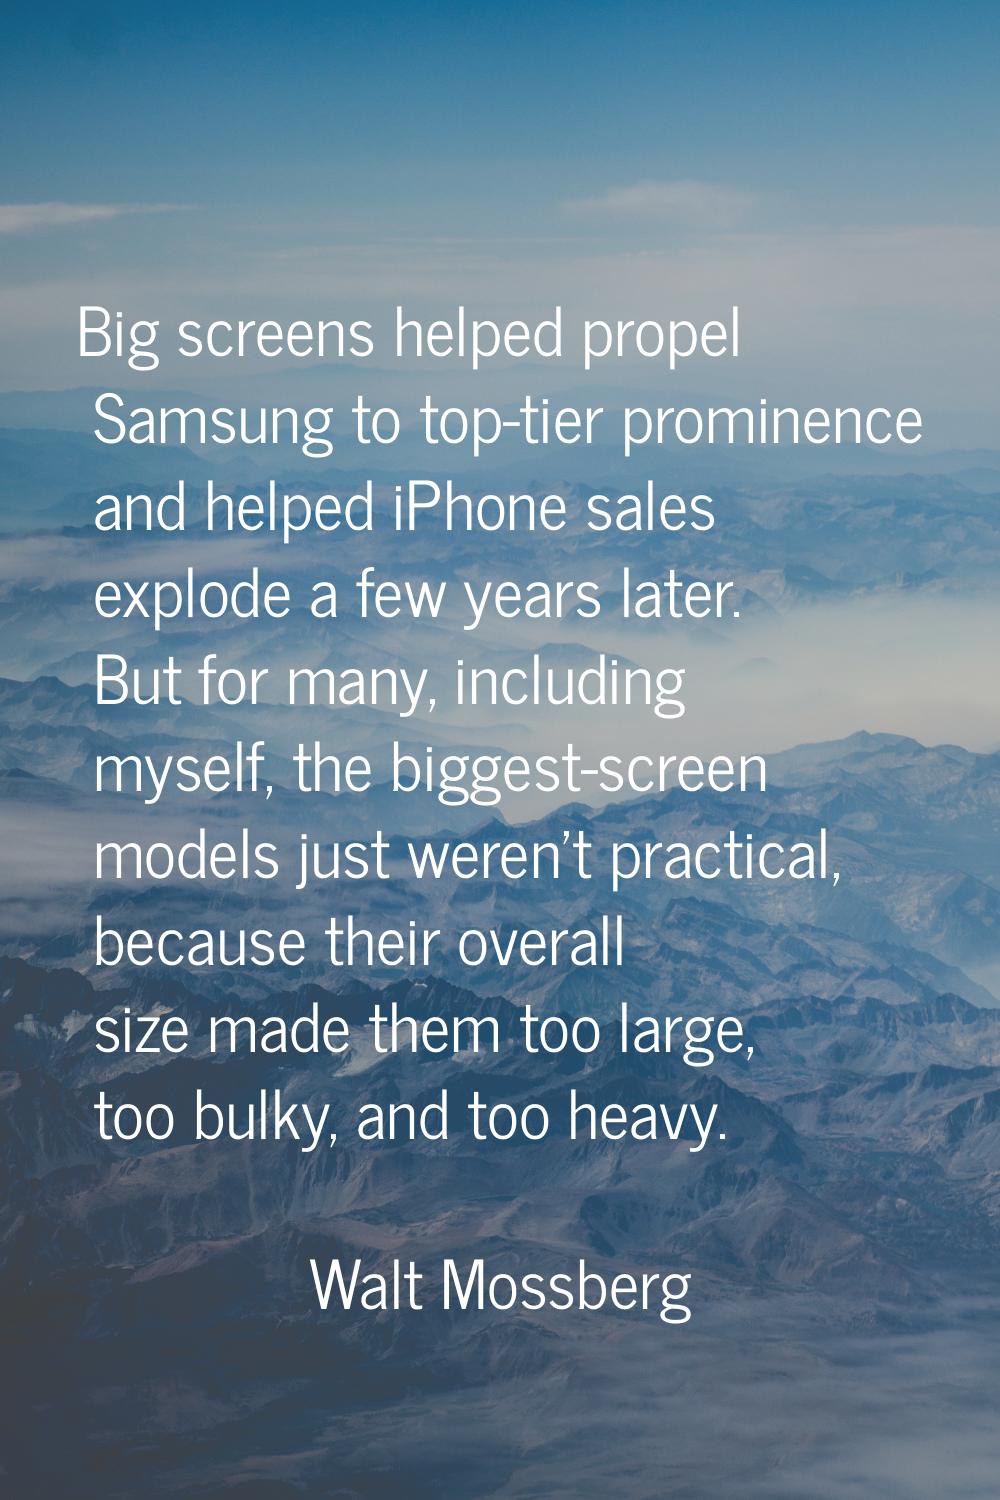 Big screens helped propel Samsung to top-tier prominence and helped iPhone sales explode a few year